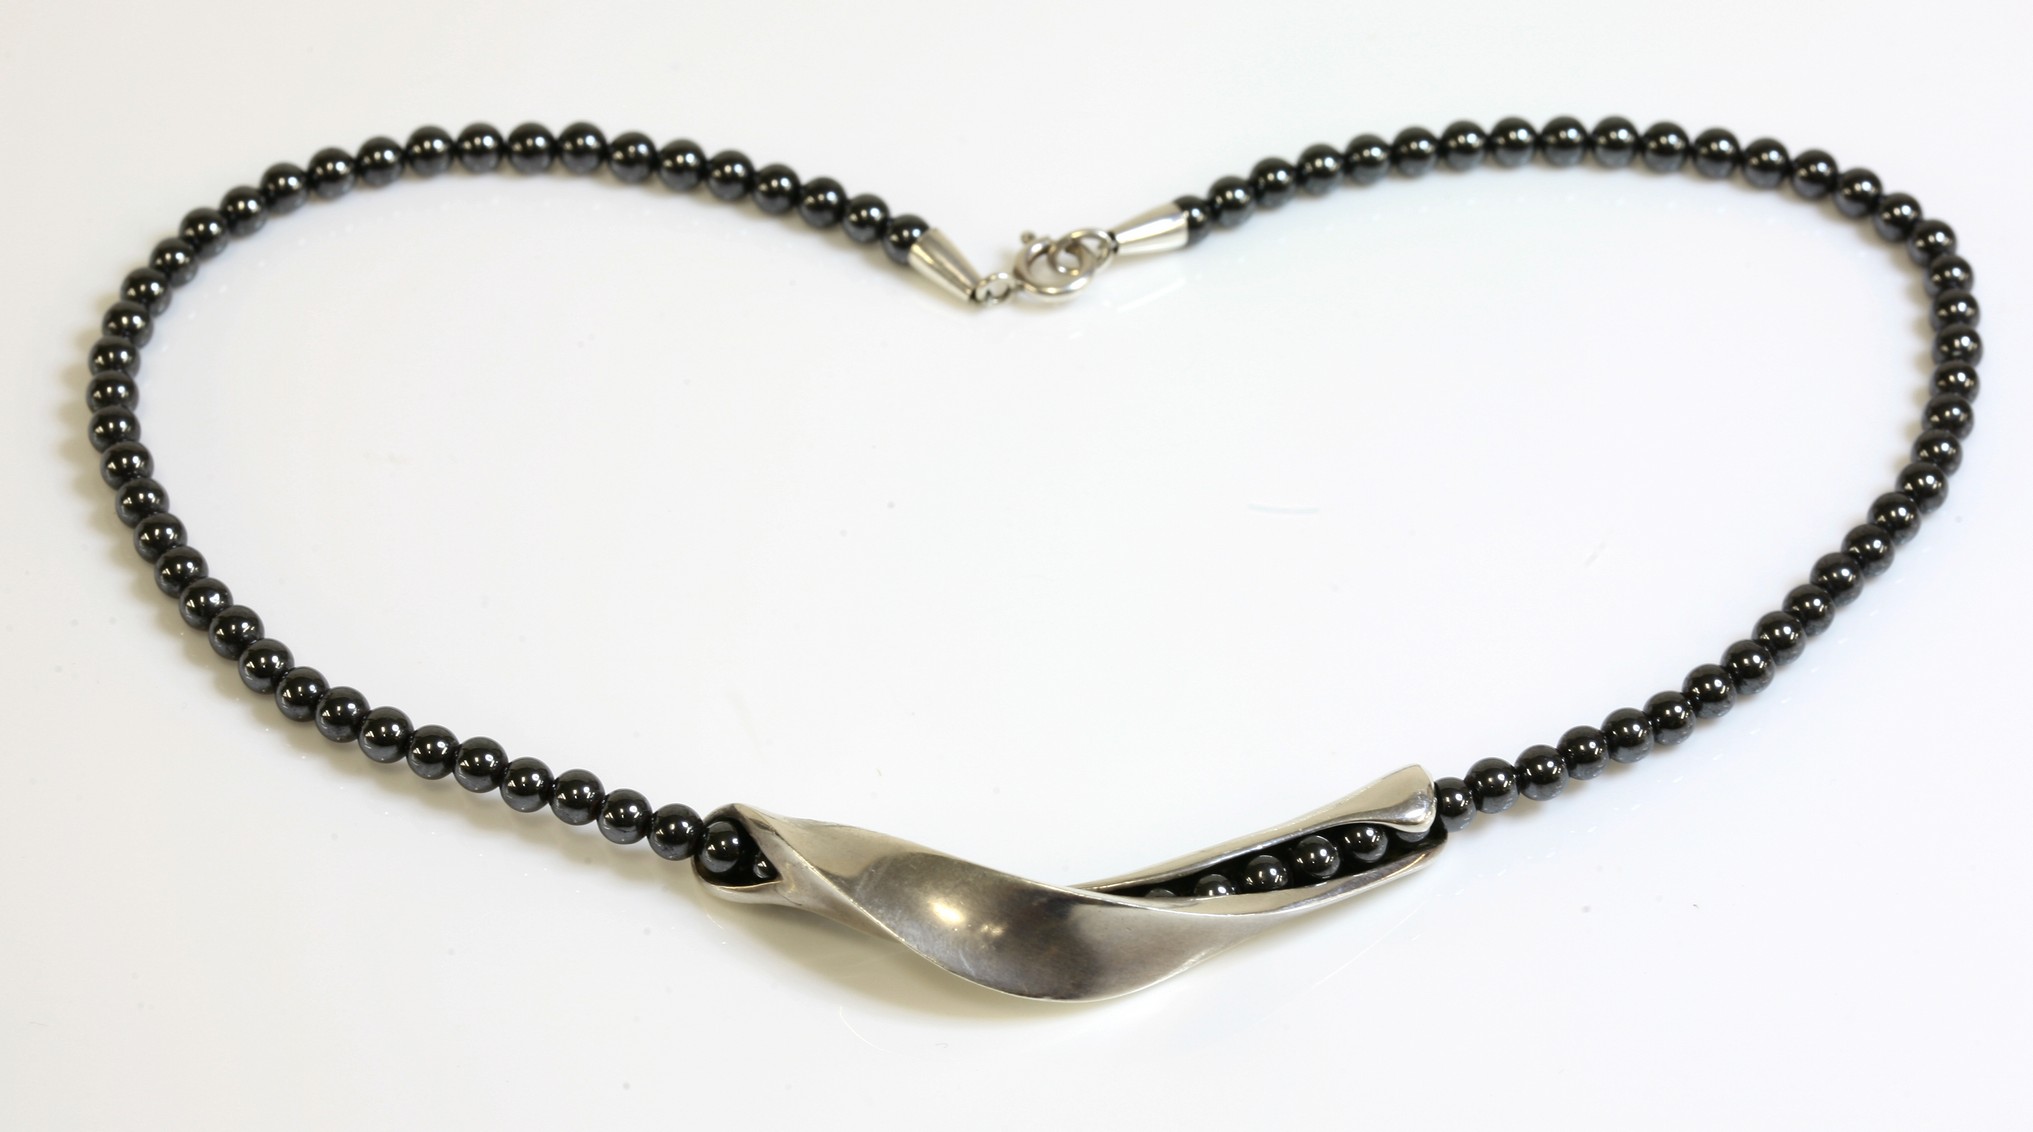 A cased silver 'Moonlight' haematite bead necklace by Georg Jensen, not numbered, a row of 4.4mm